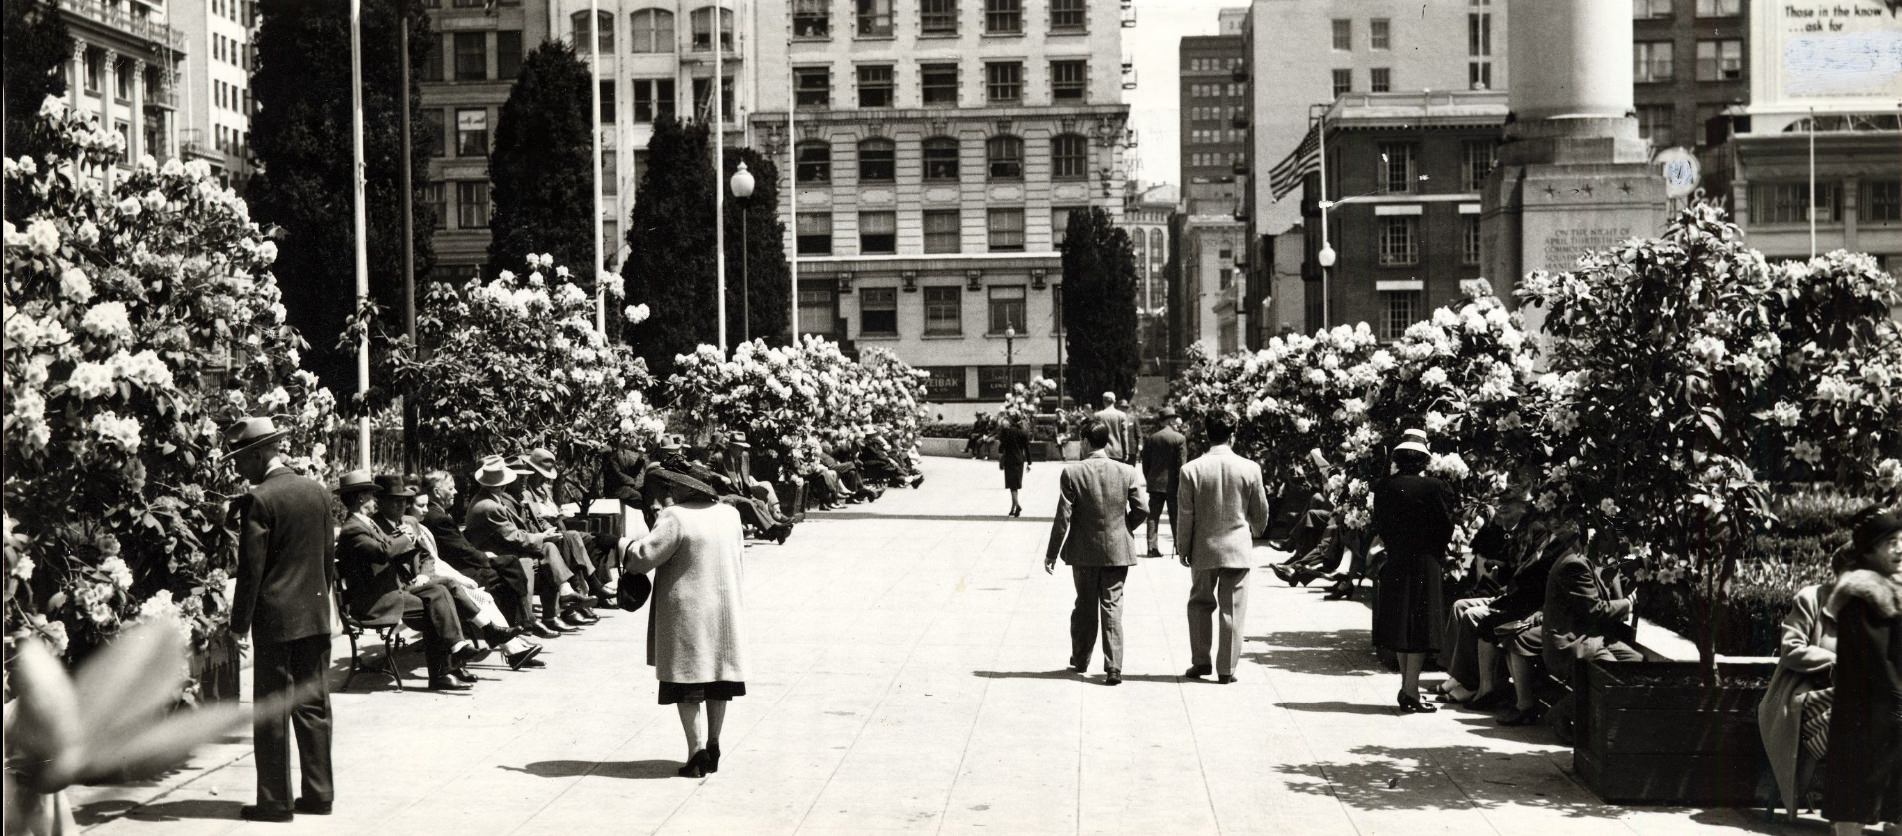 Rhododendron display in Union Square Park, 1947